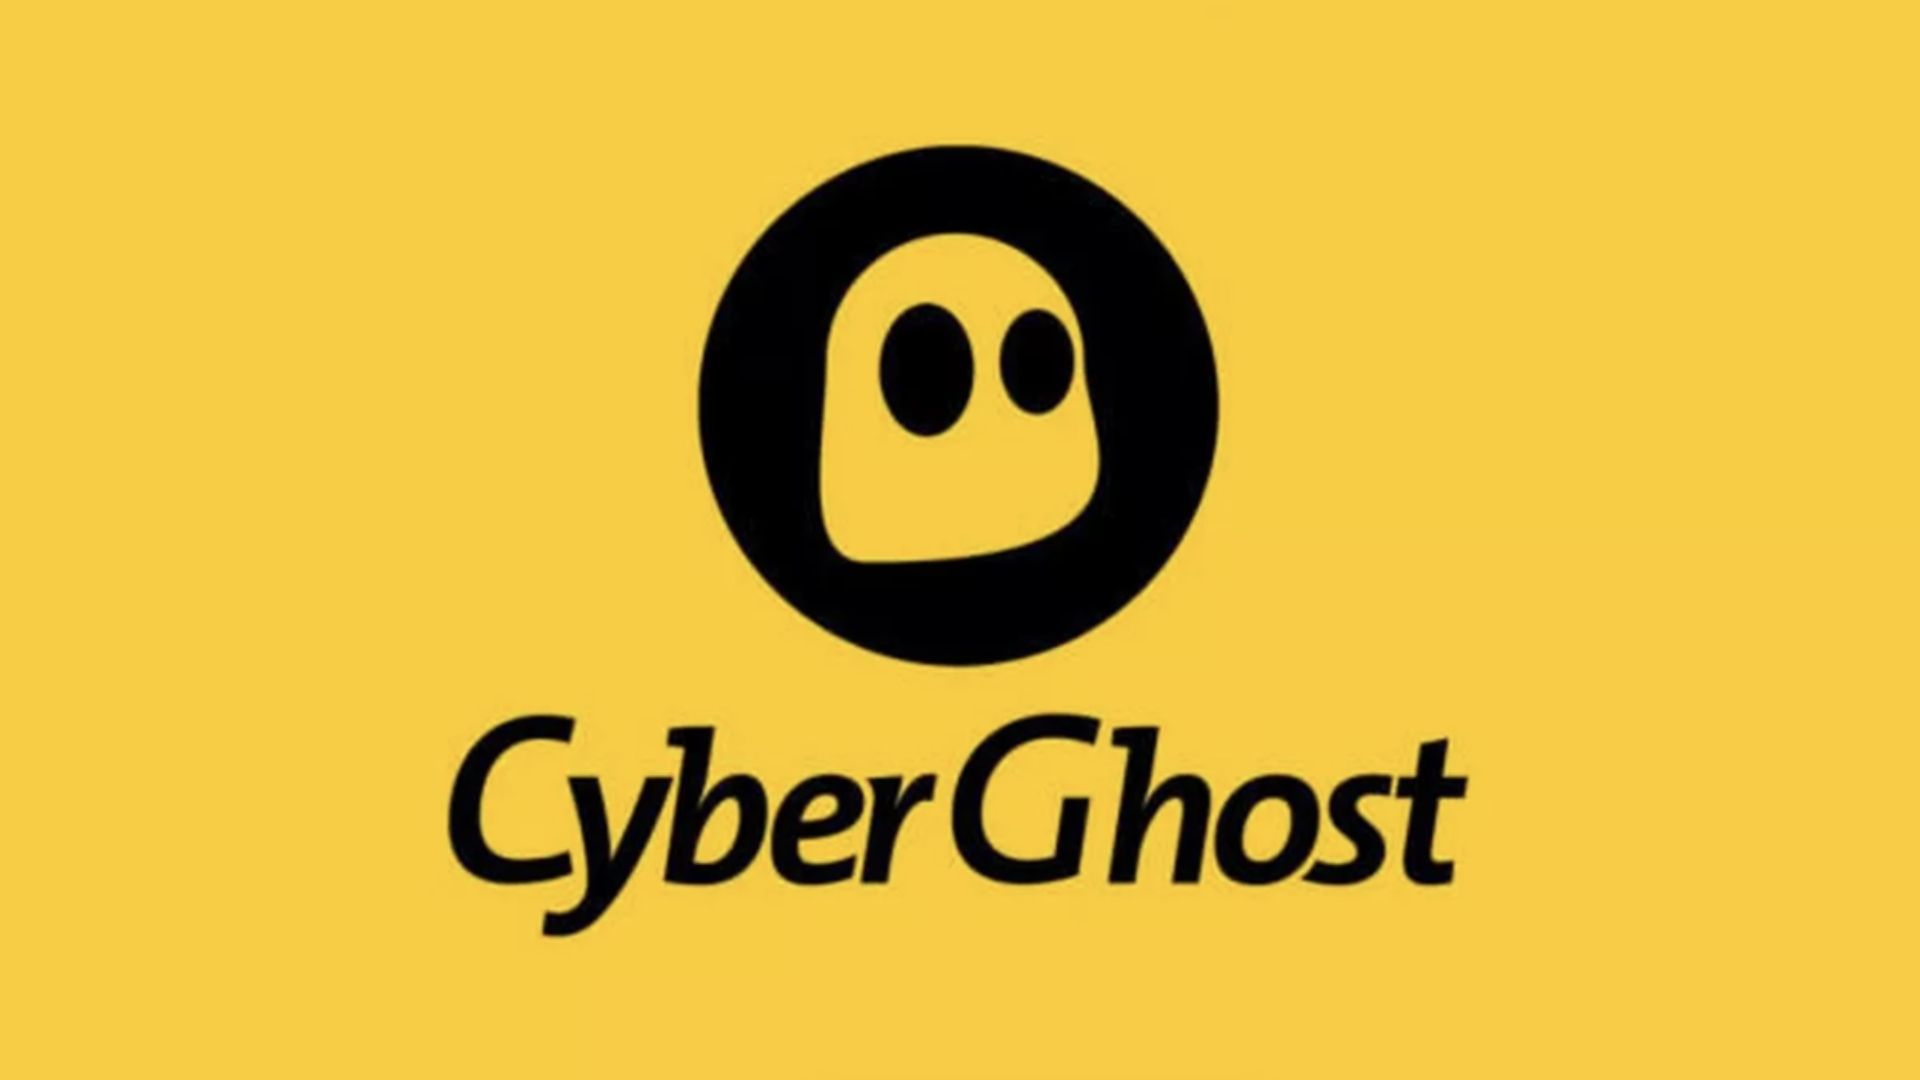 Best Roblox VPN: CyberGhost. Image shows the company logo.